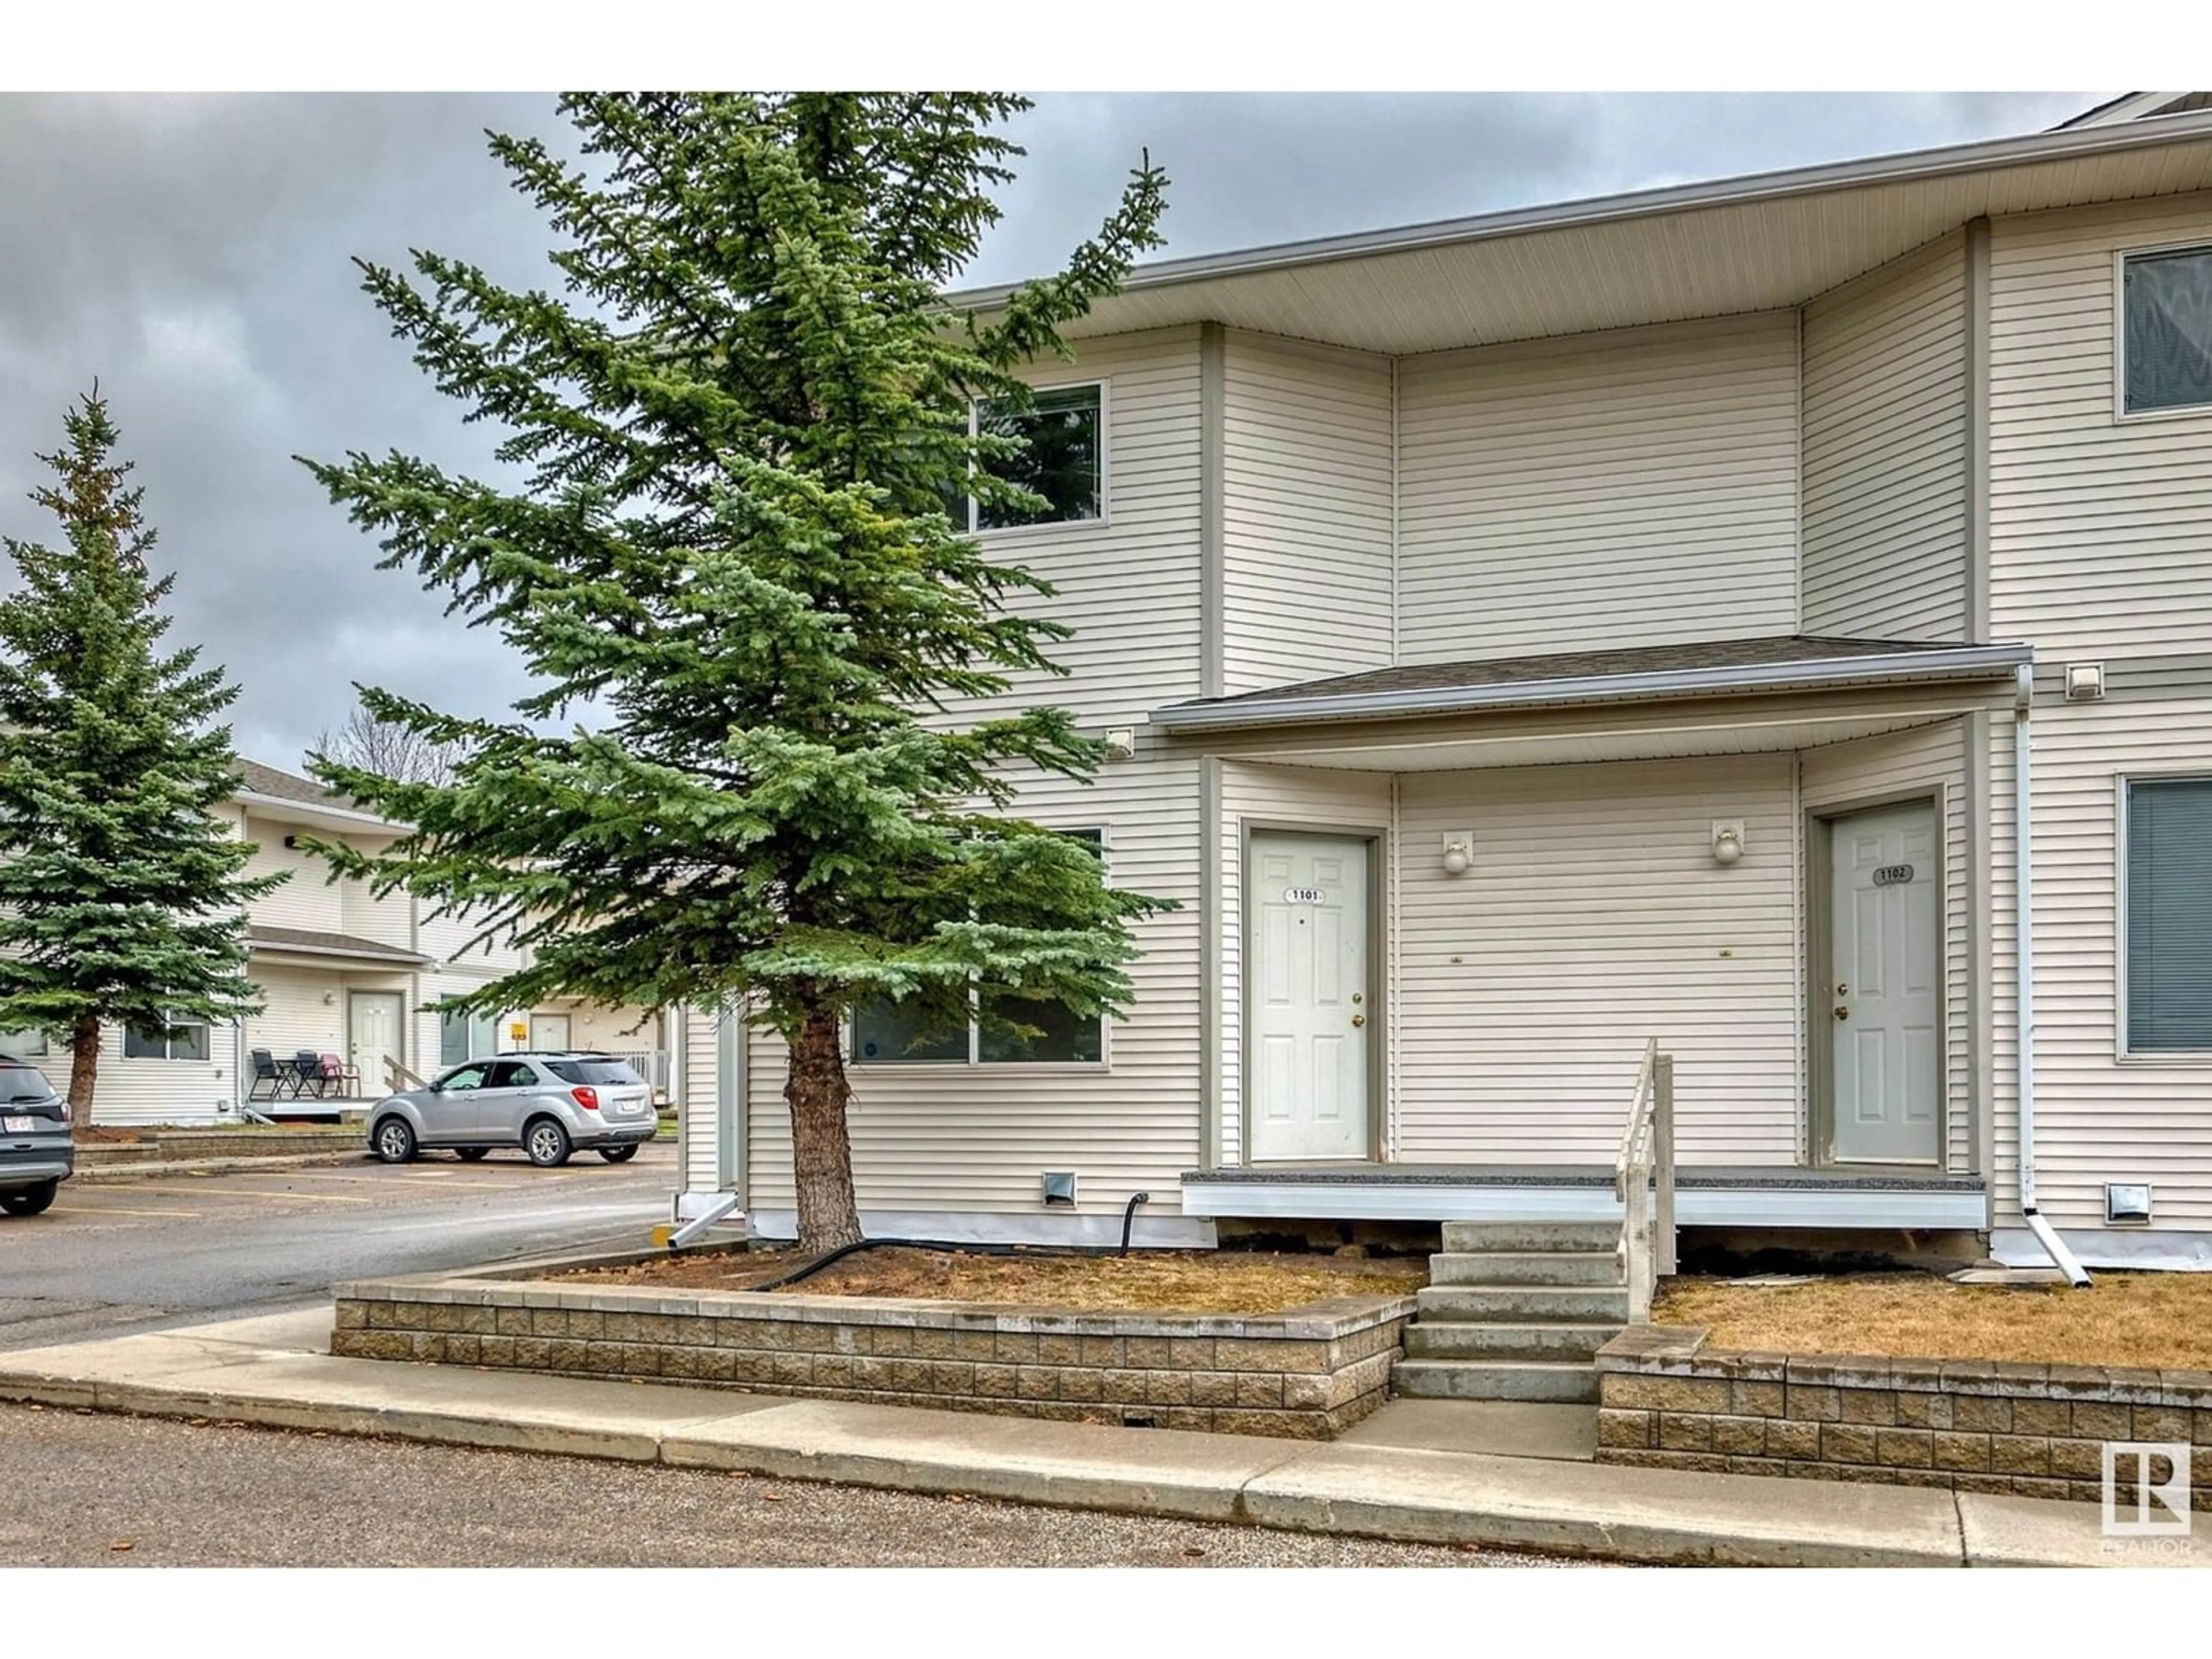 A pic from exterior of the house or condo for #1101 610 KING ST, Spruce Grove Alberta T7X4J9